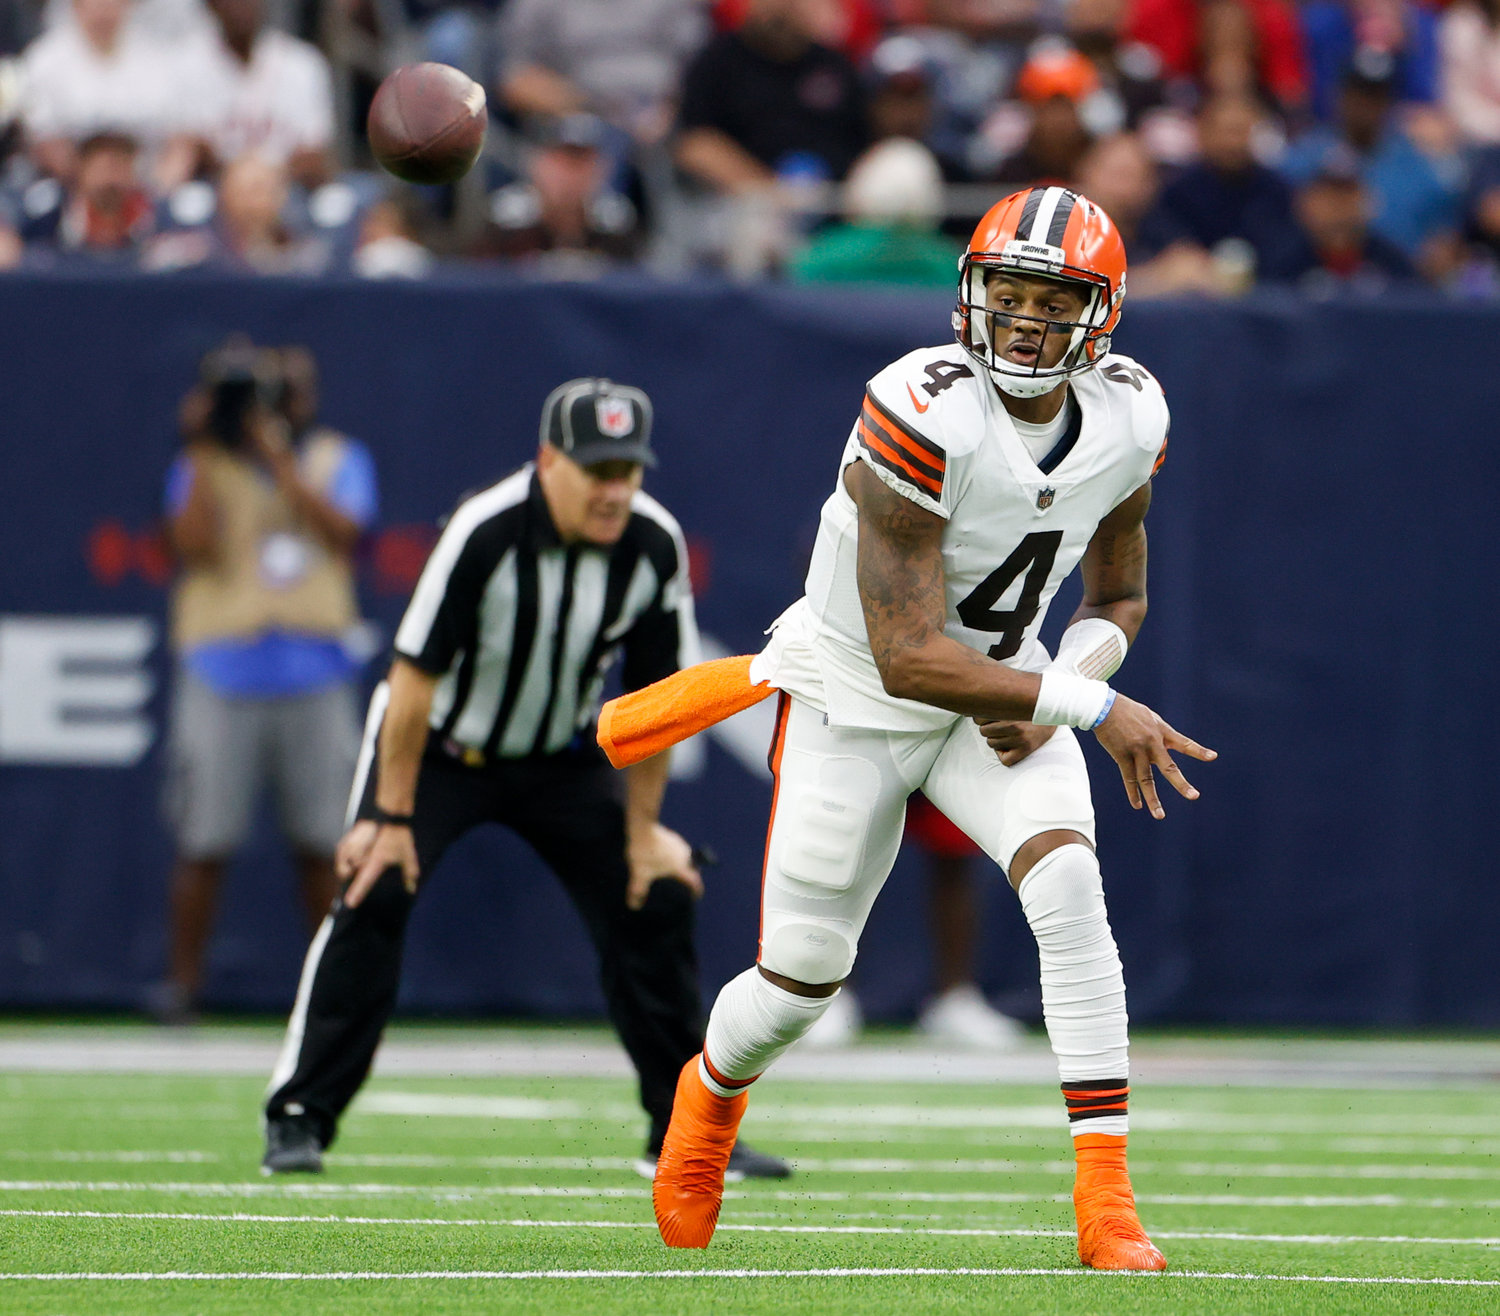 Cleveland Browns quarterback Deshaun Watson (4) passes the ball during an NFL game between the Houston Texans and the Cleveland Browns on Dec. 4, 2022, in Houston. The Browns won, 27-14.